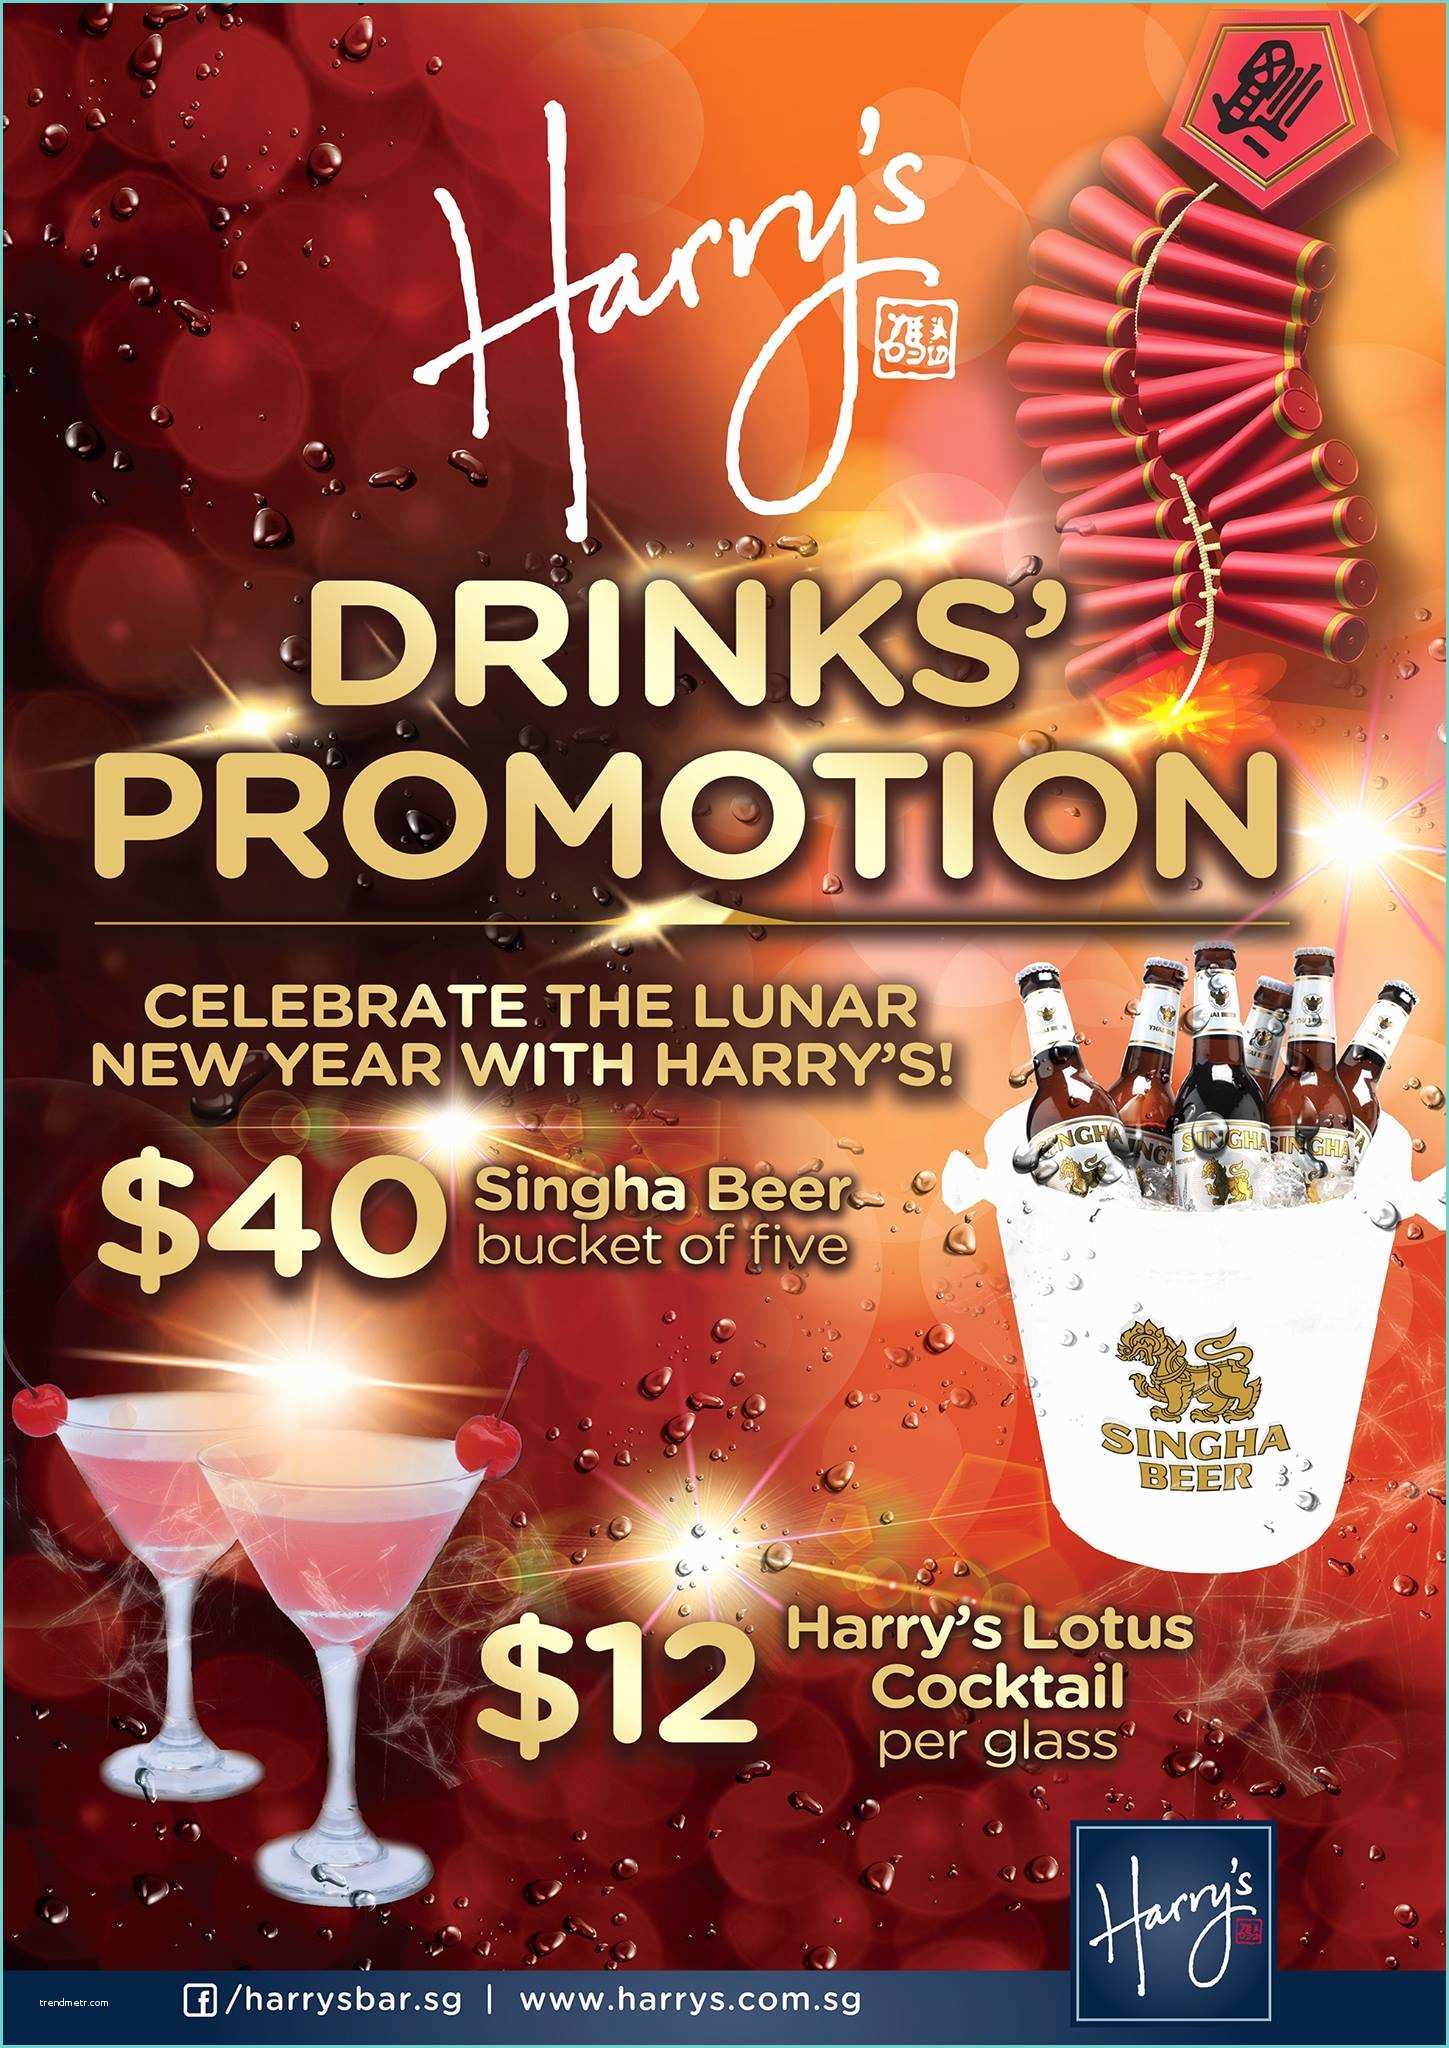 Promotion Ideas for Bars Harry S Bar Singha Beer Bucket & Cocktail Lunar New Year